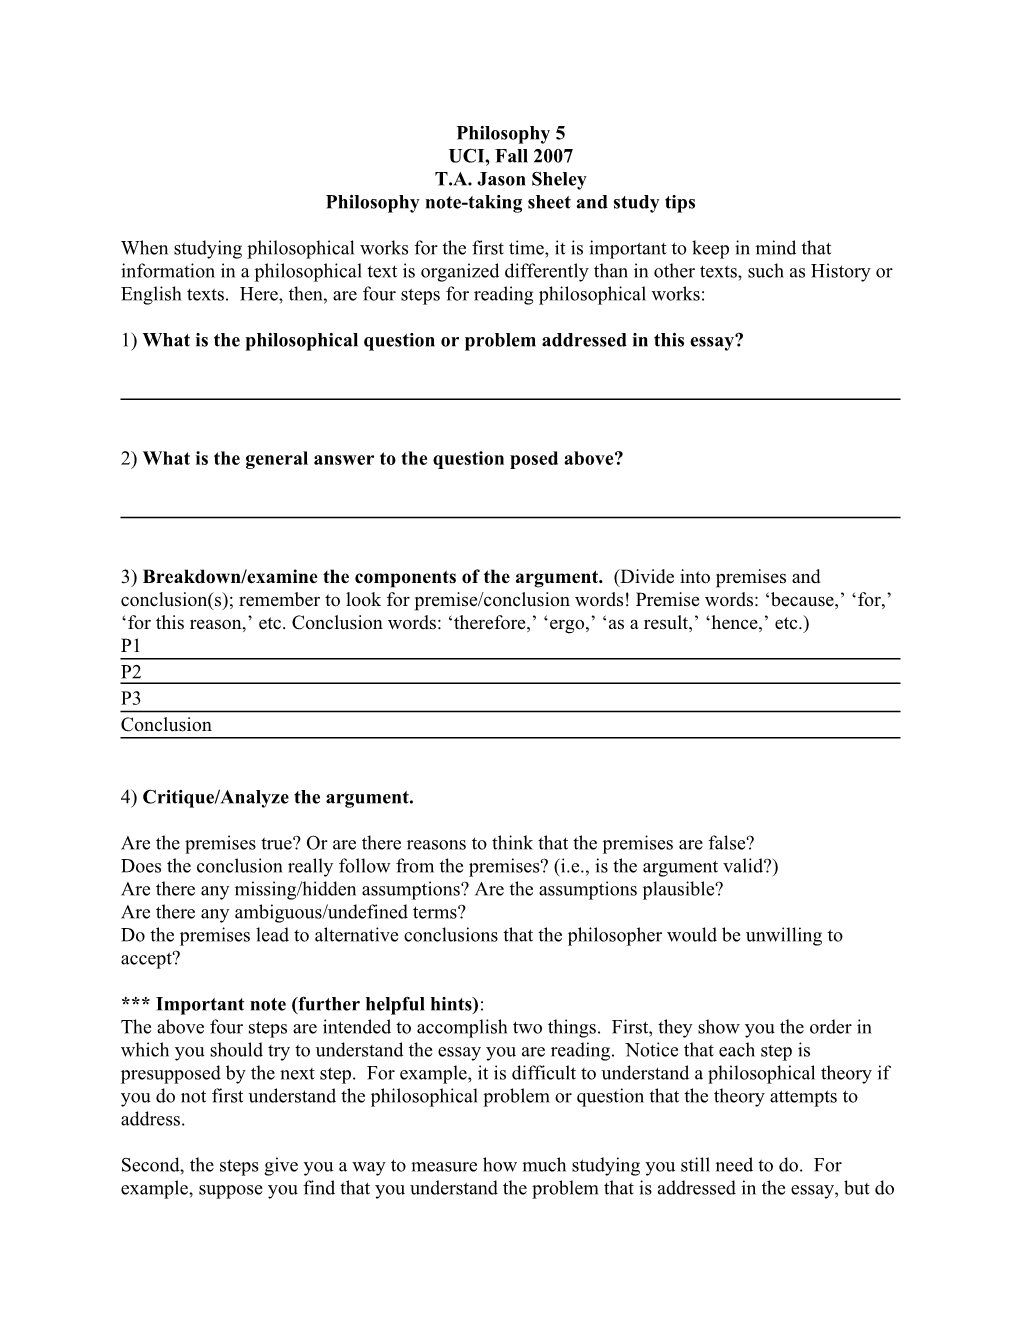 Philosophy Note-Taking Sheet and Study Tips